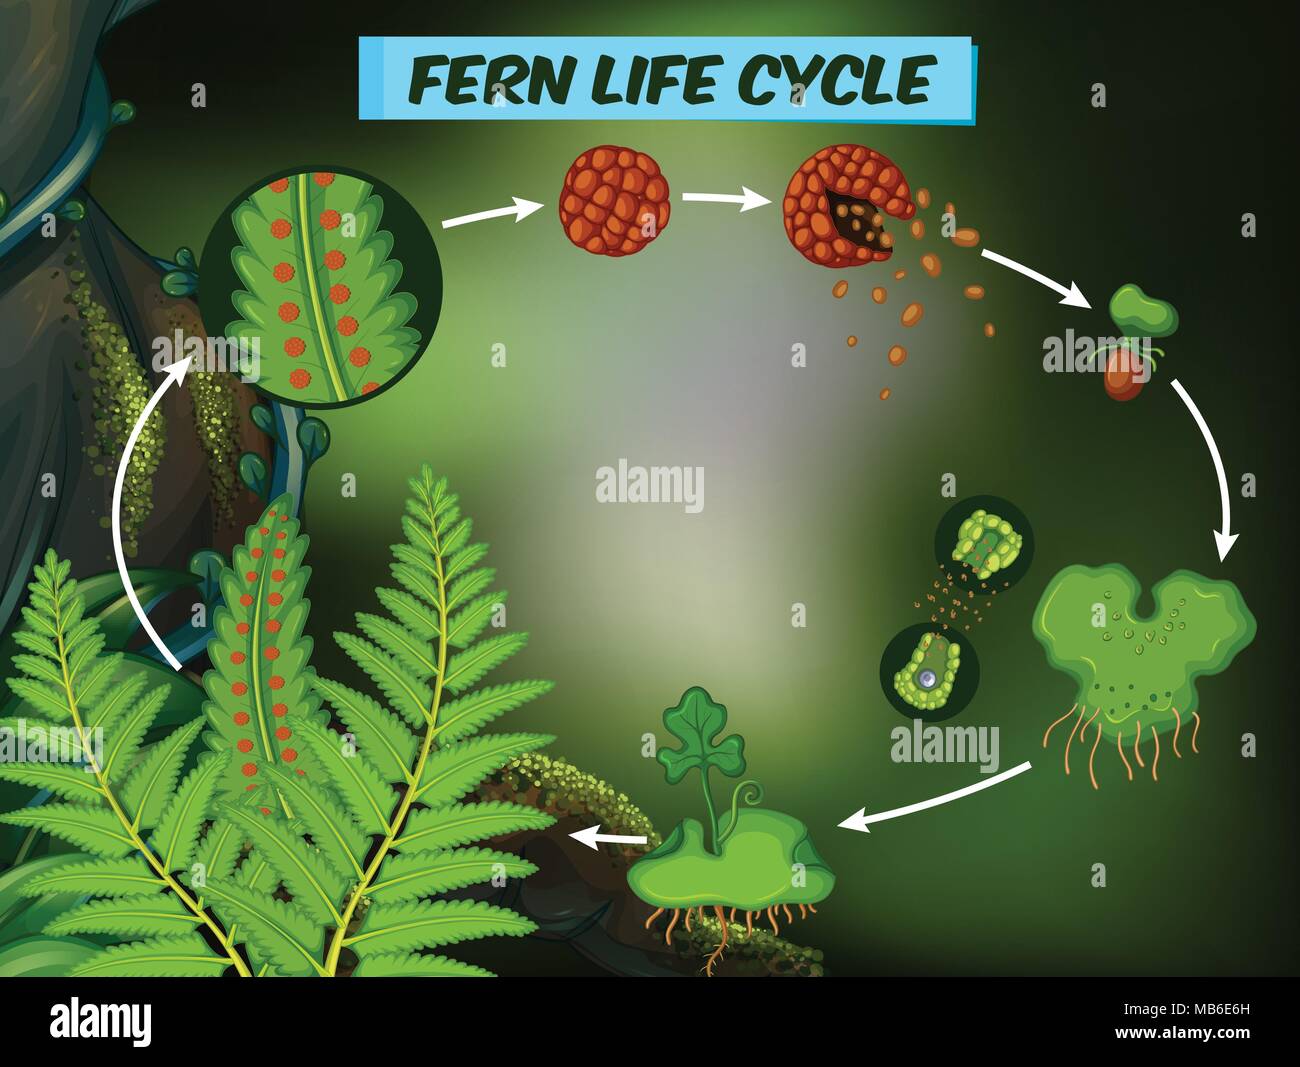 Diagram showing fern life cycle illustration Stock Vector